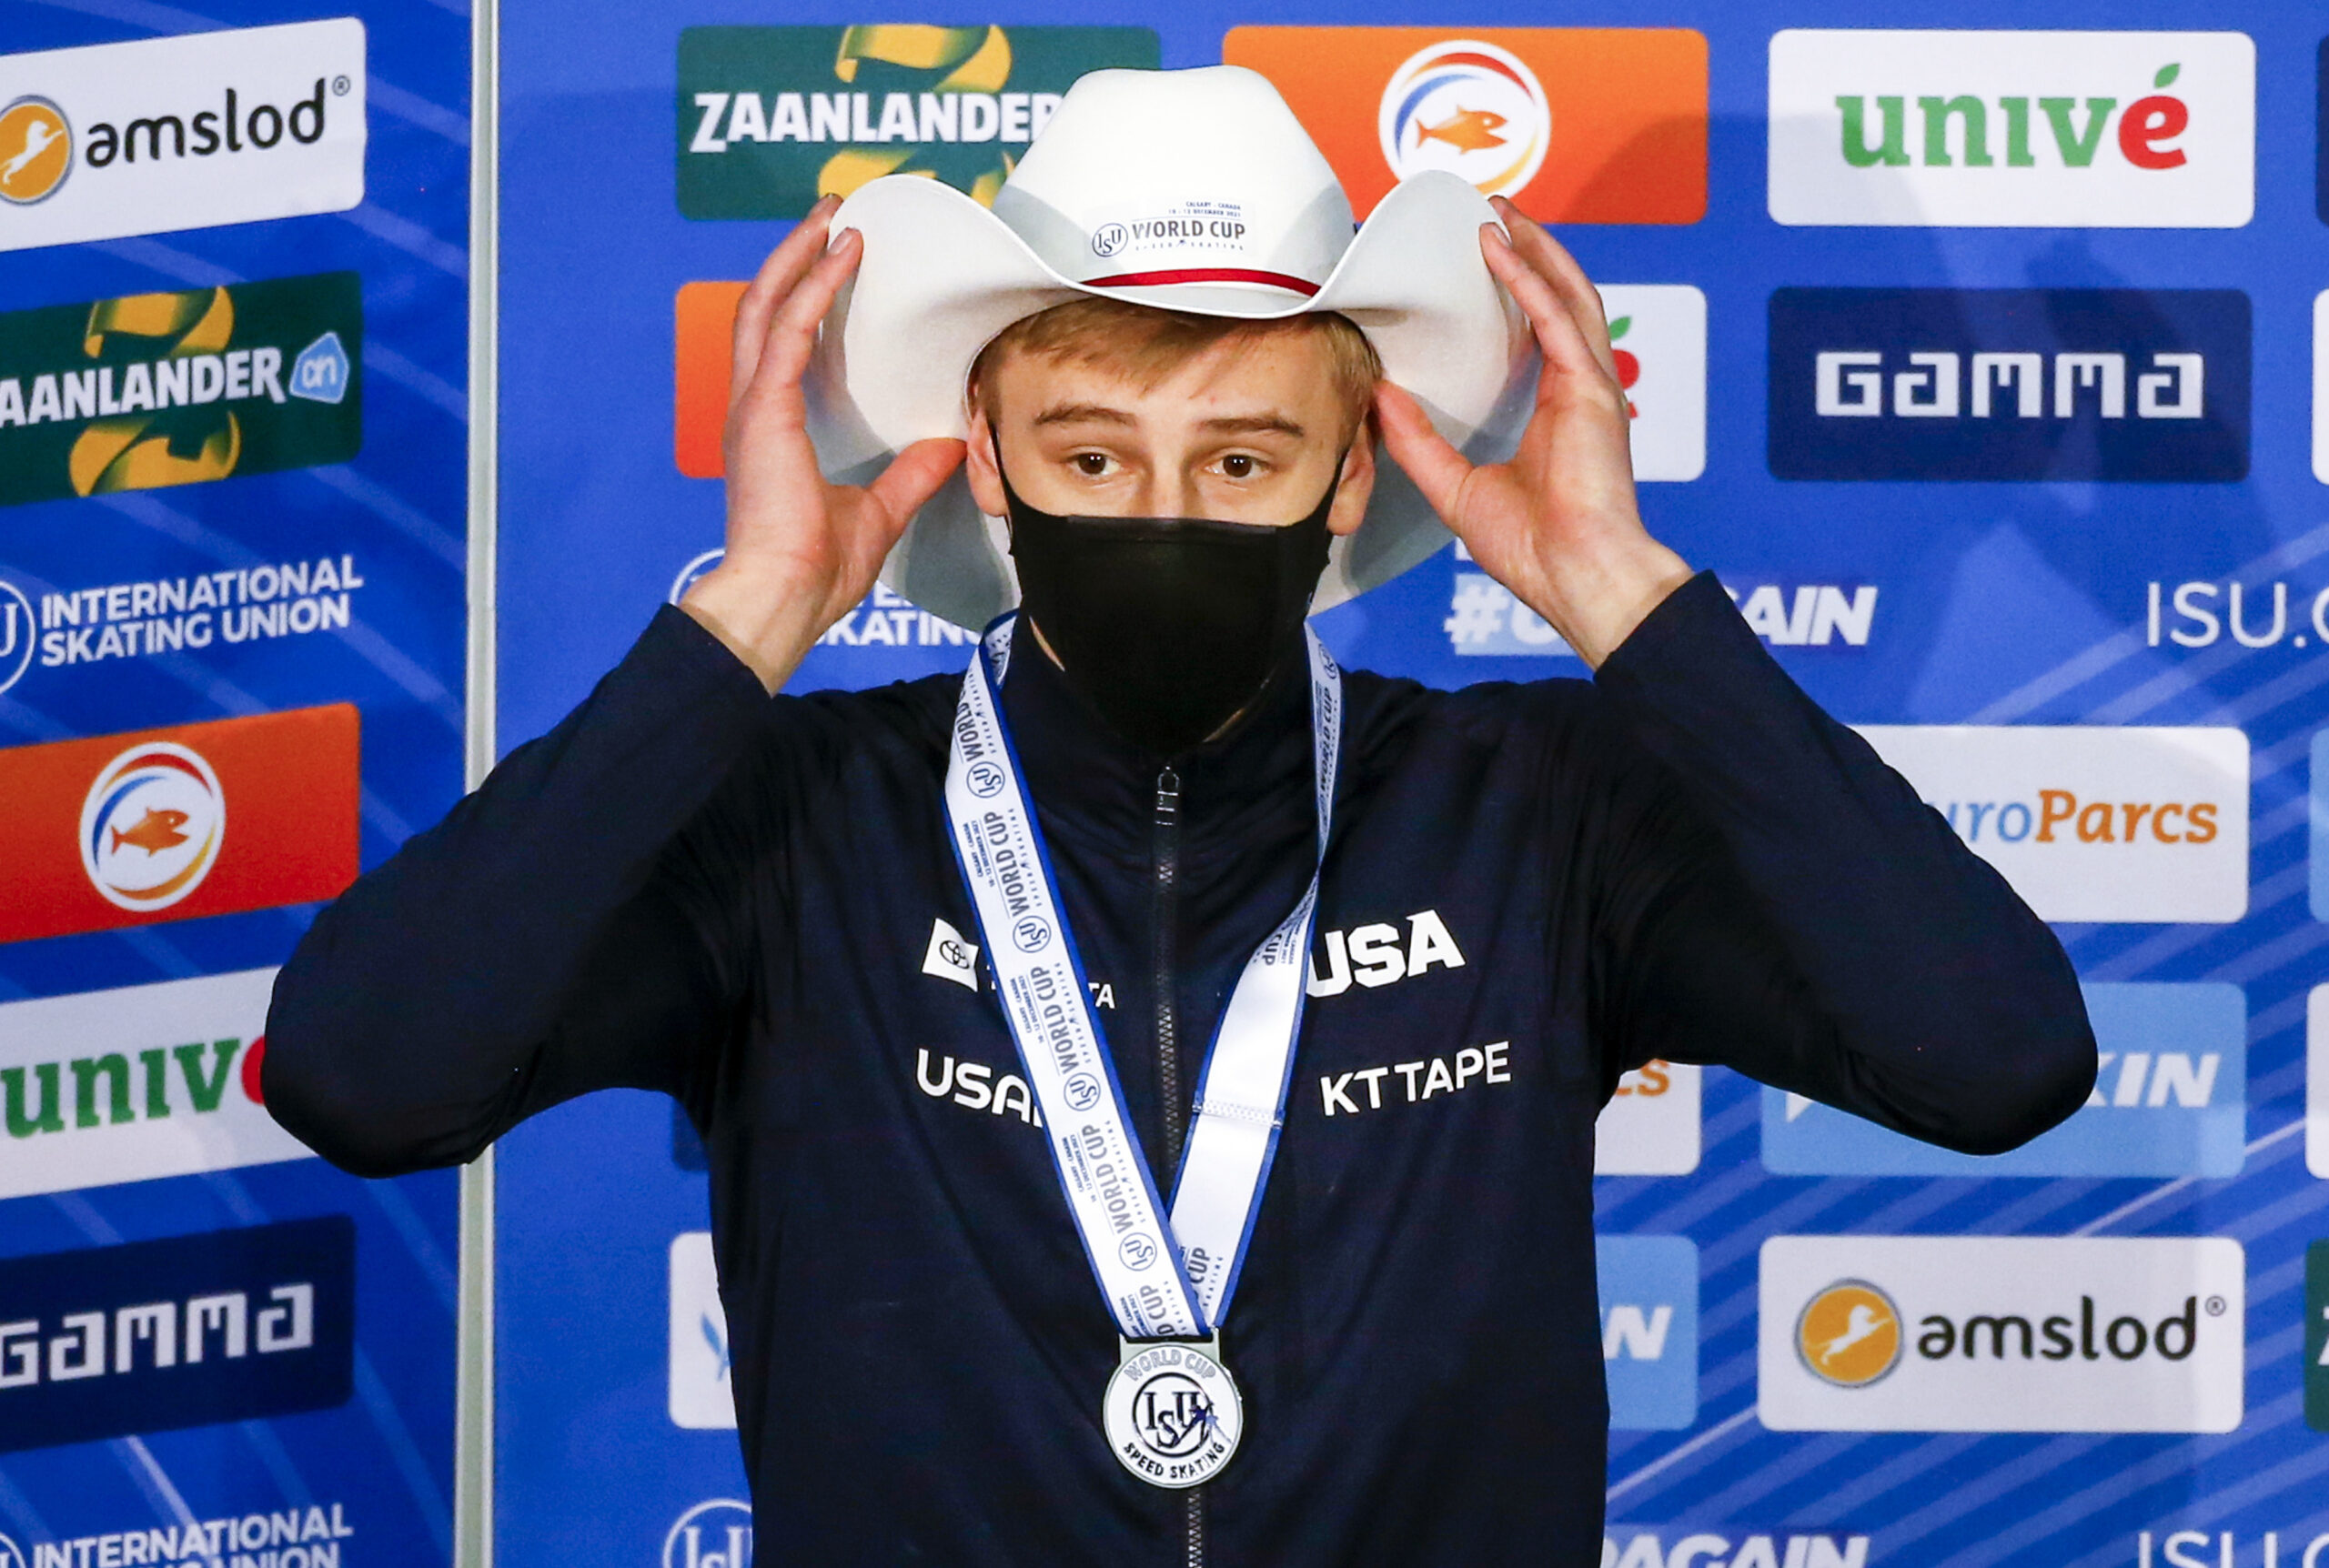 Jordan Stolz with a cowboy hat to celebrate his second place finish following the men's 1000-meter competition at the ISU World Cup speedskating event